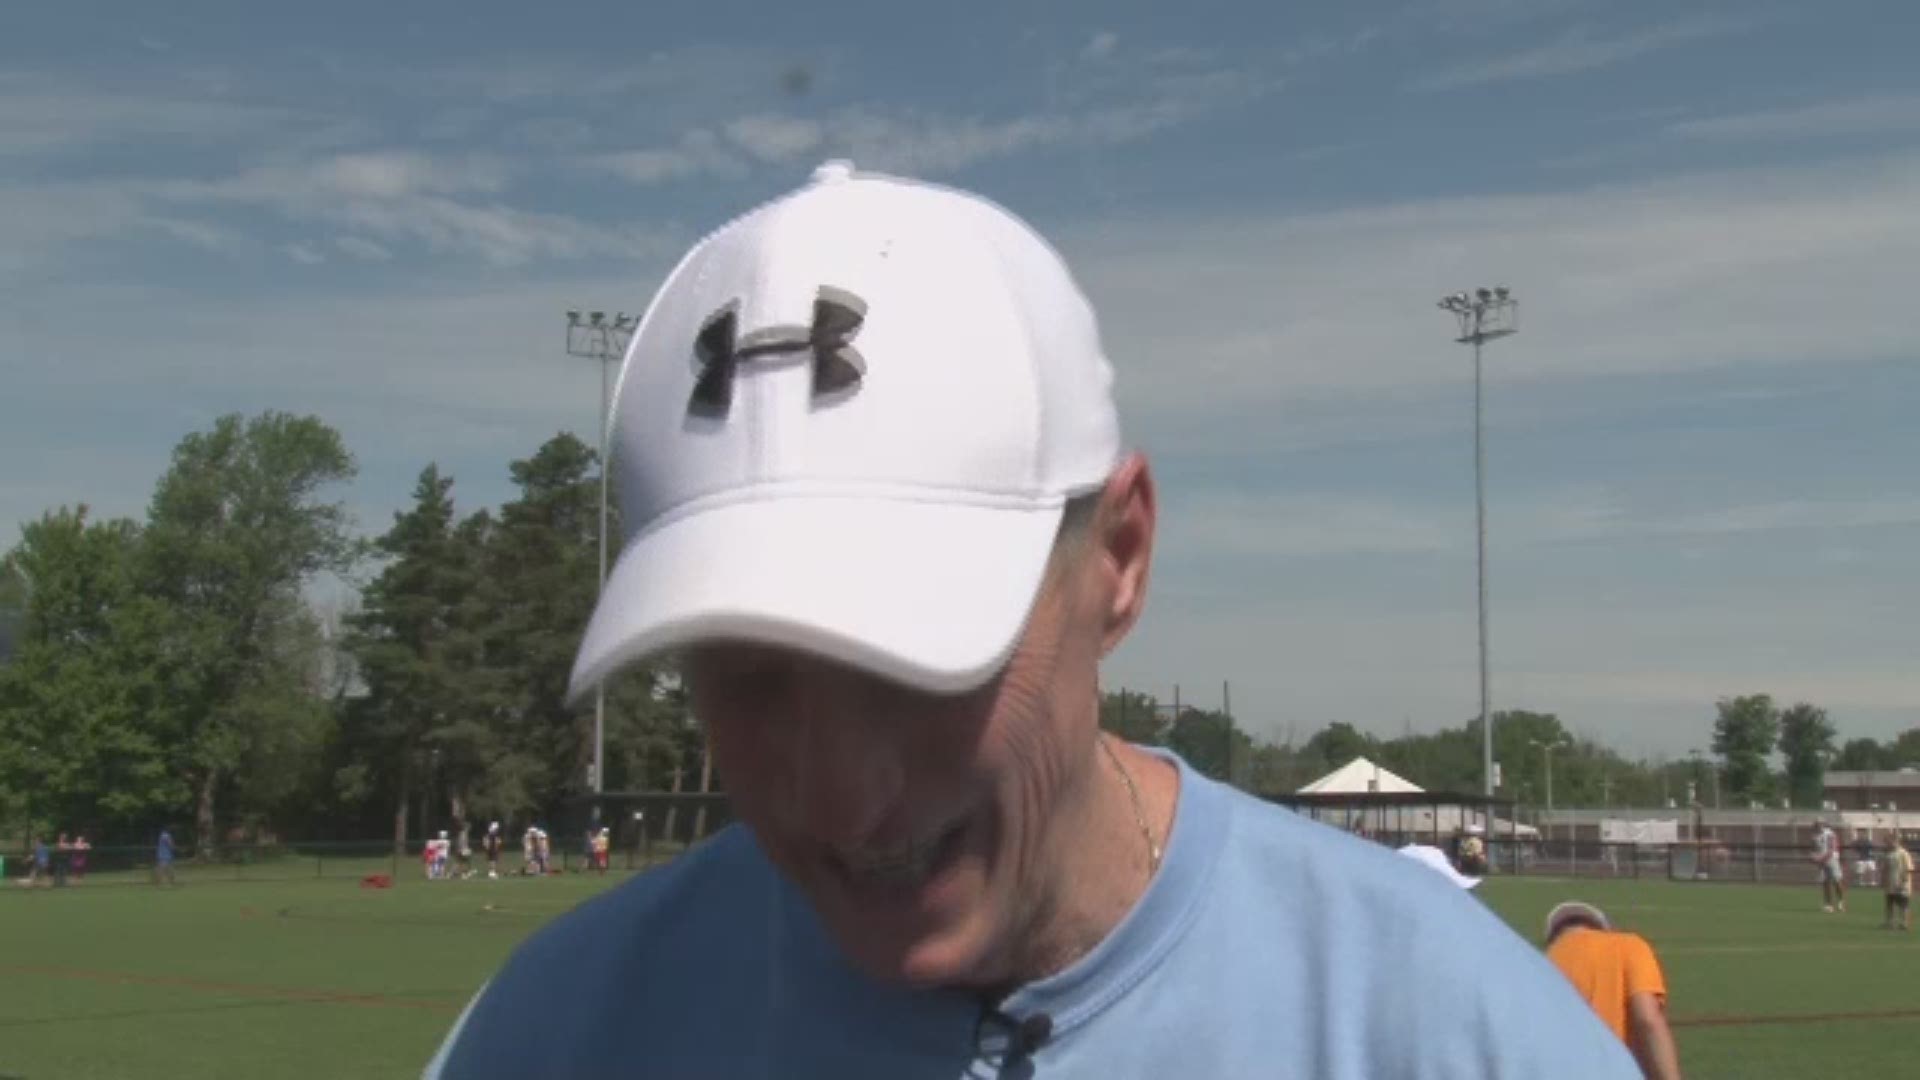 Jim Kelly says he "feels great" as he hosts the 32nd annual Jim Kelly football camp being held this year at Williamsville North High School.